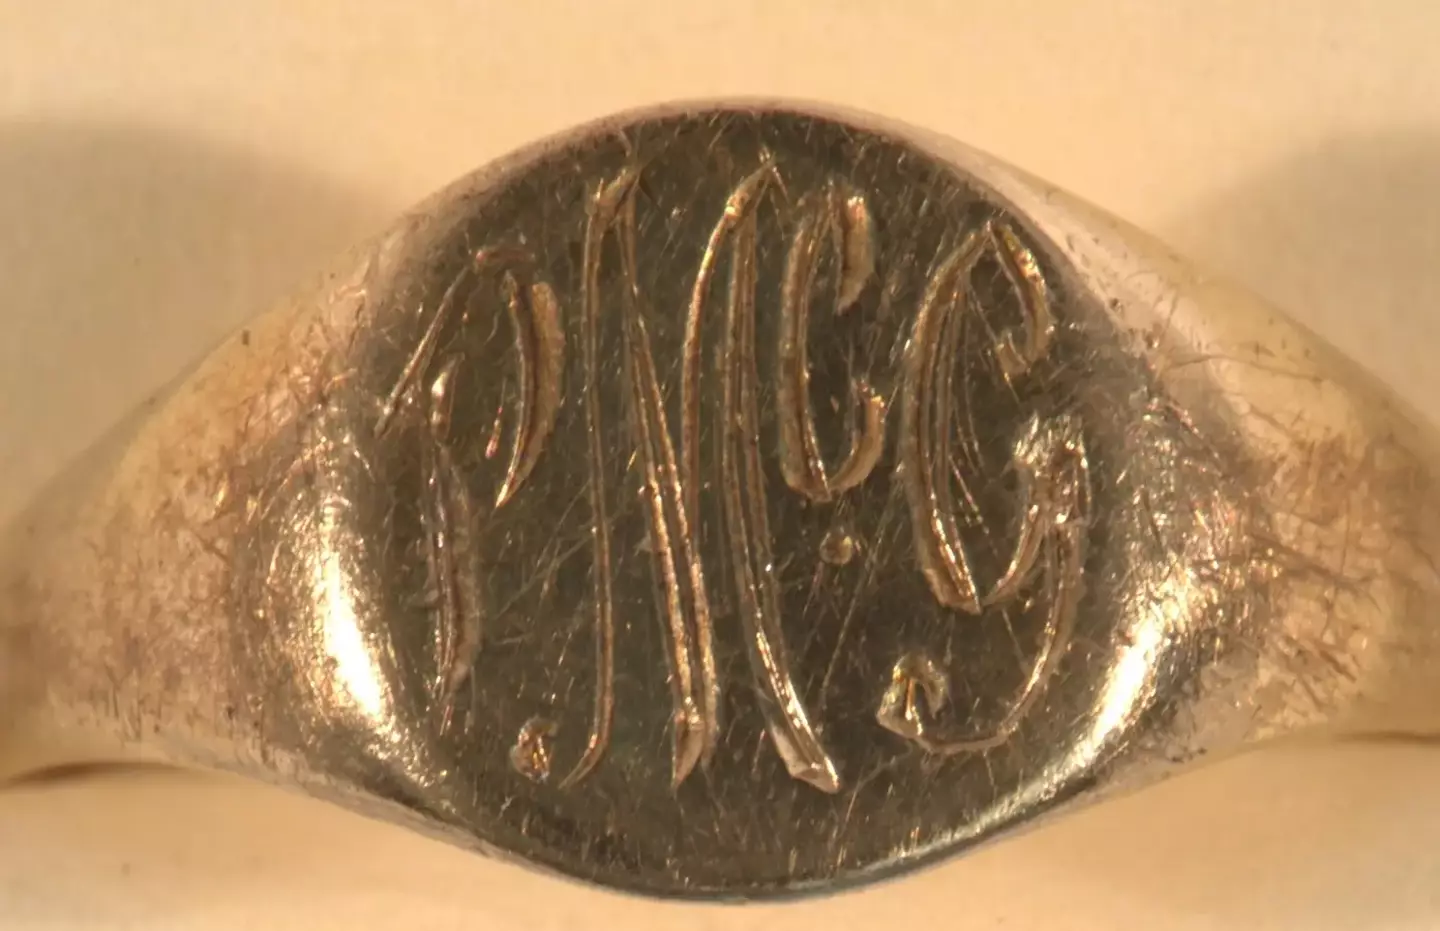 Patricia McGlone's ID matches the initials on a signet ring found next to her remains (NYPD)